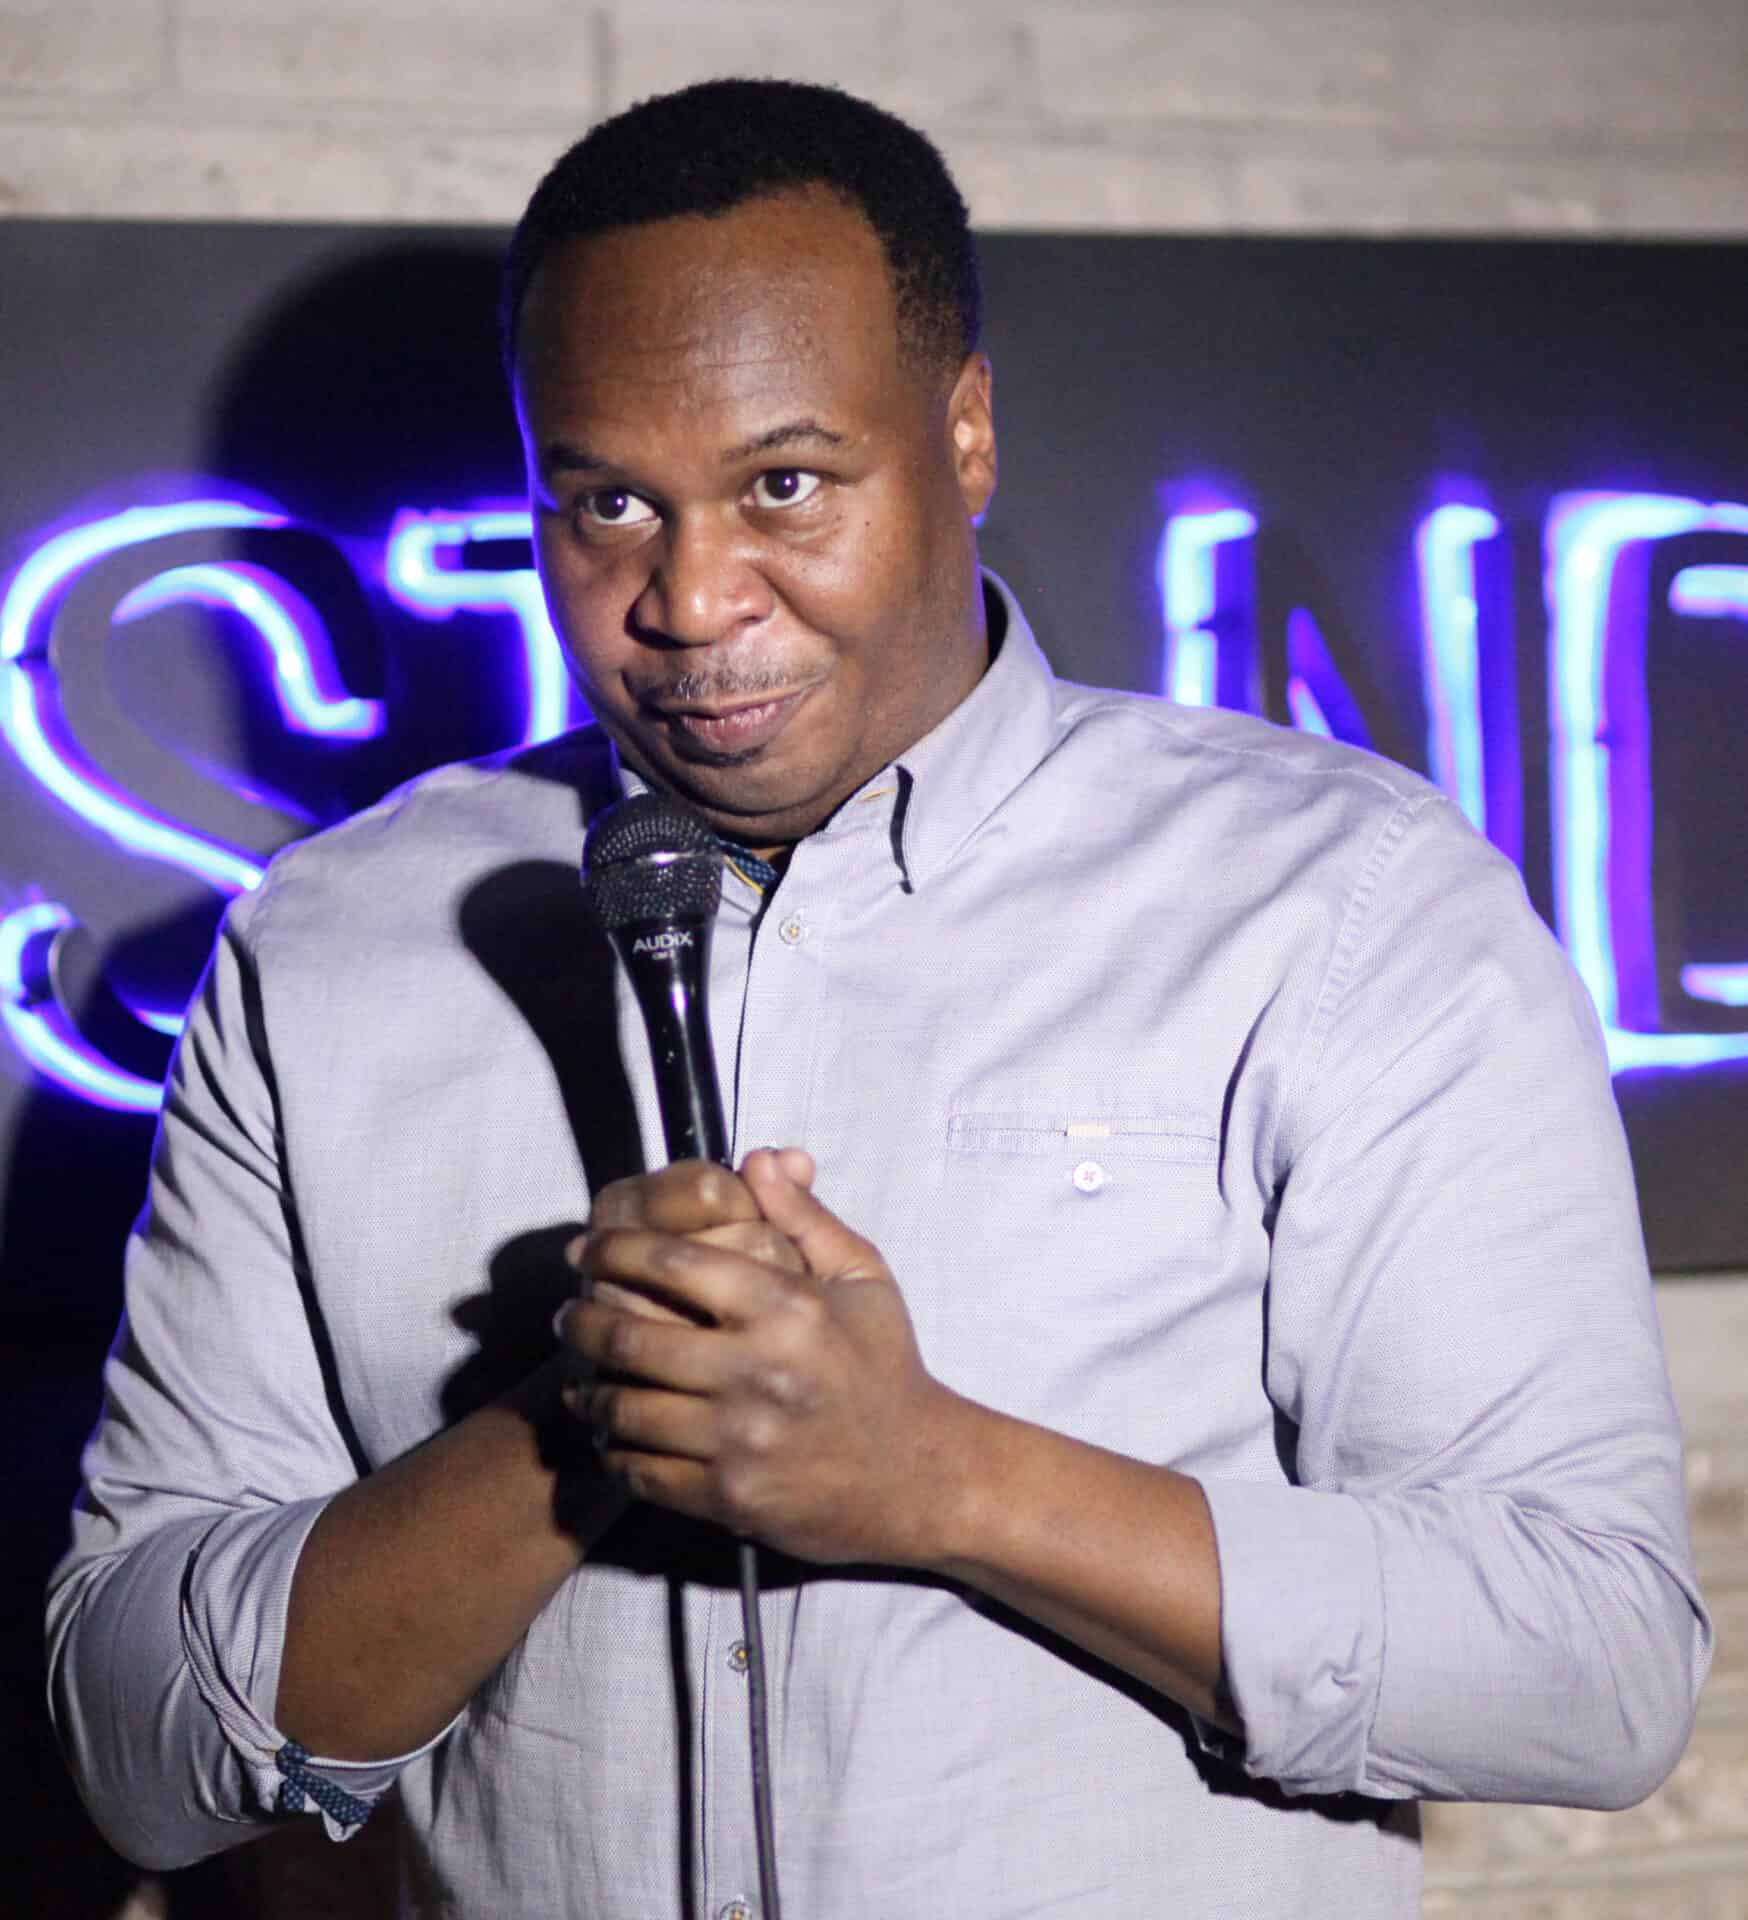 Roy Wood Jr. doing a stand-up comedy performance